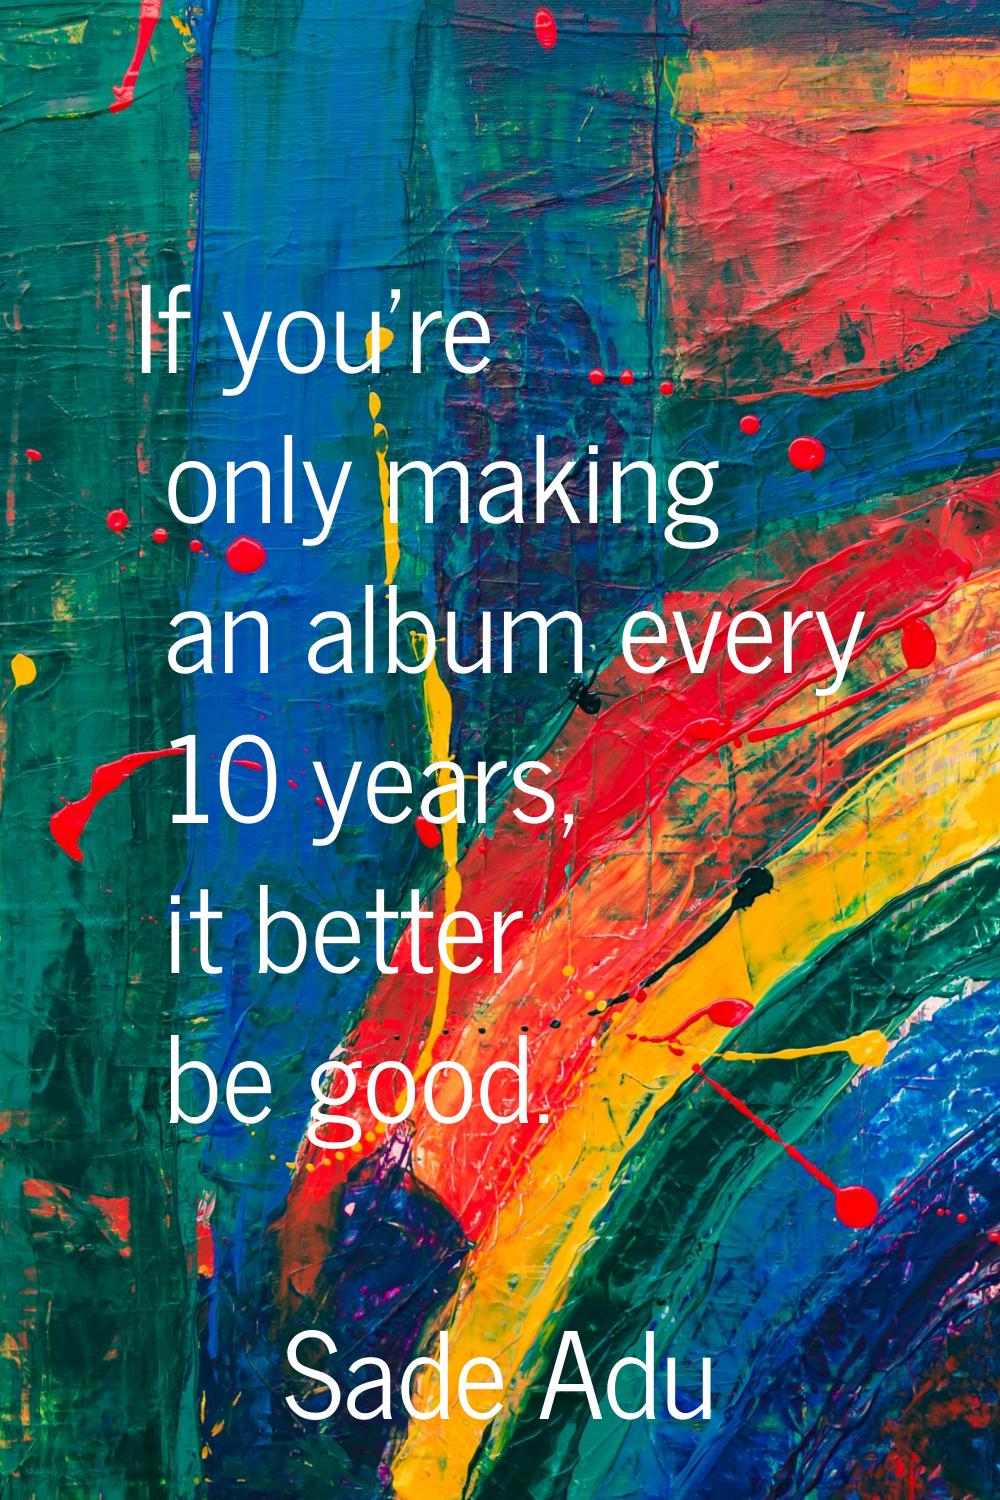 If you're only making an album every 10 years, it better be good.